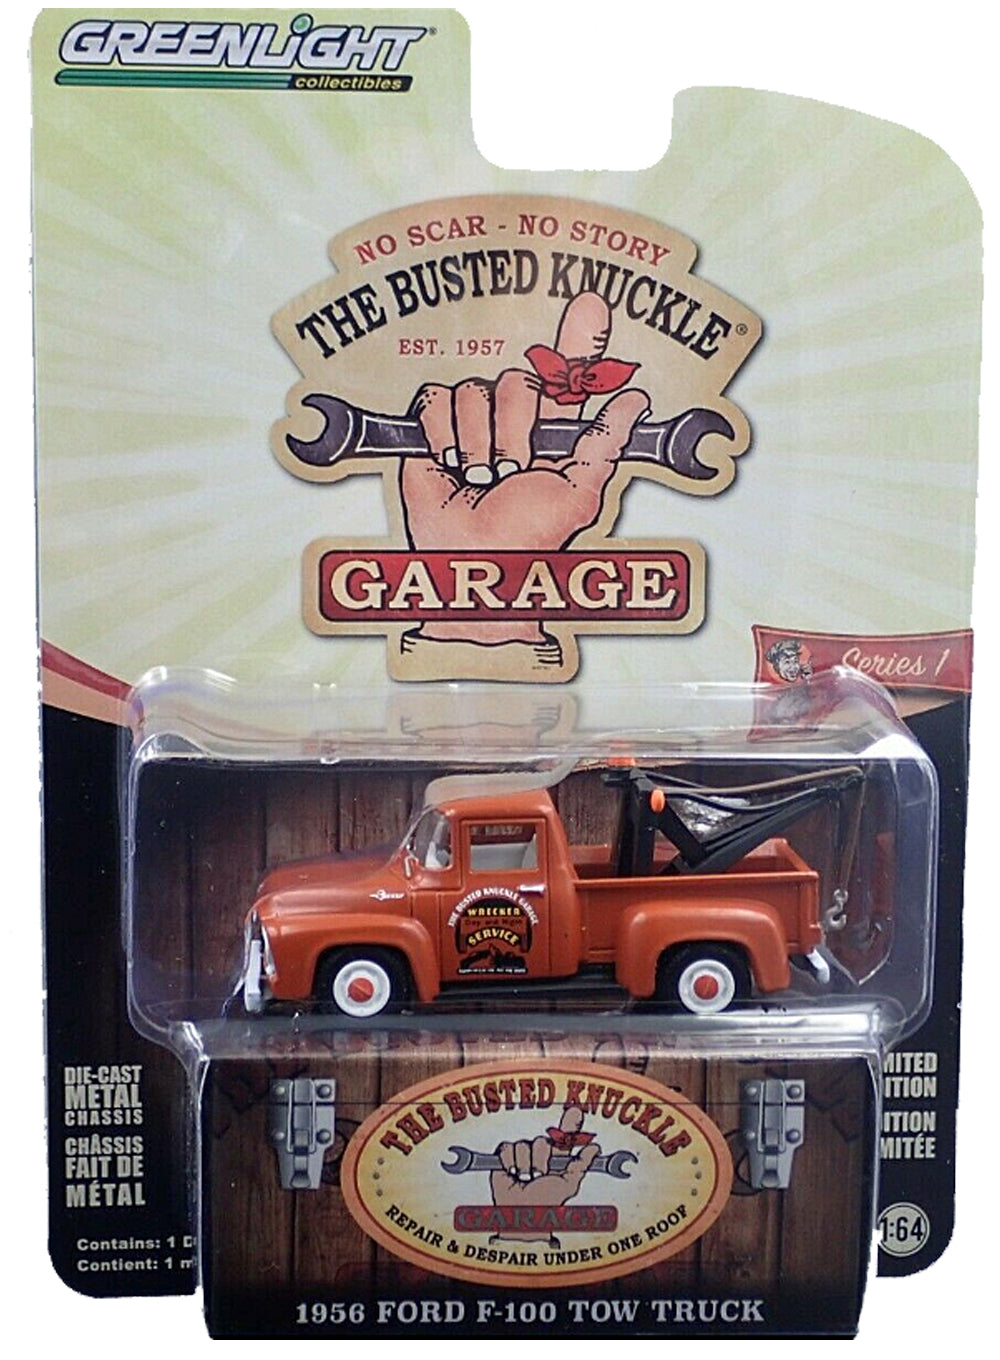 The Busted Knuckle Garage Mini Thermometer BKG-70092